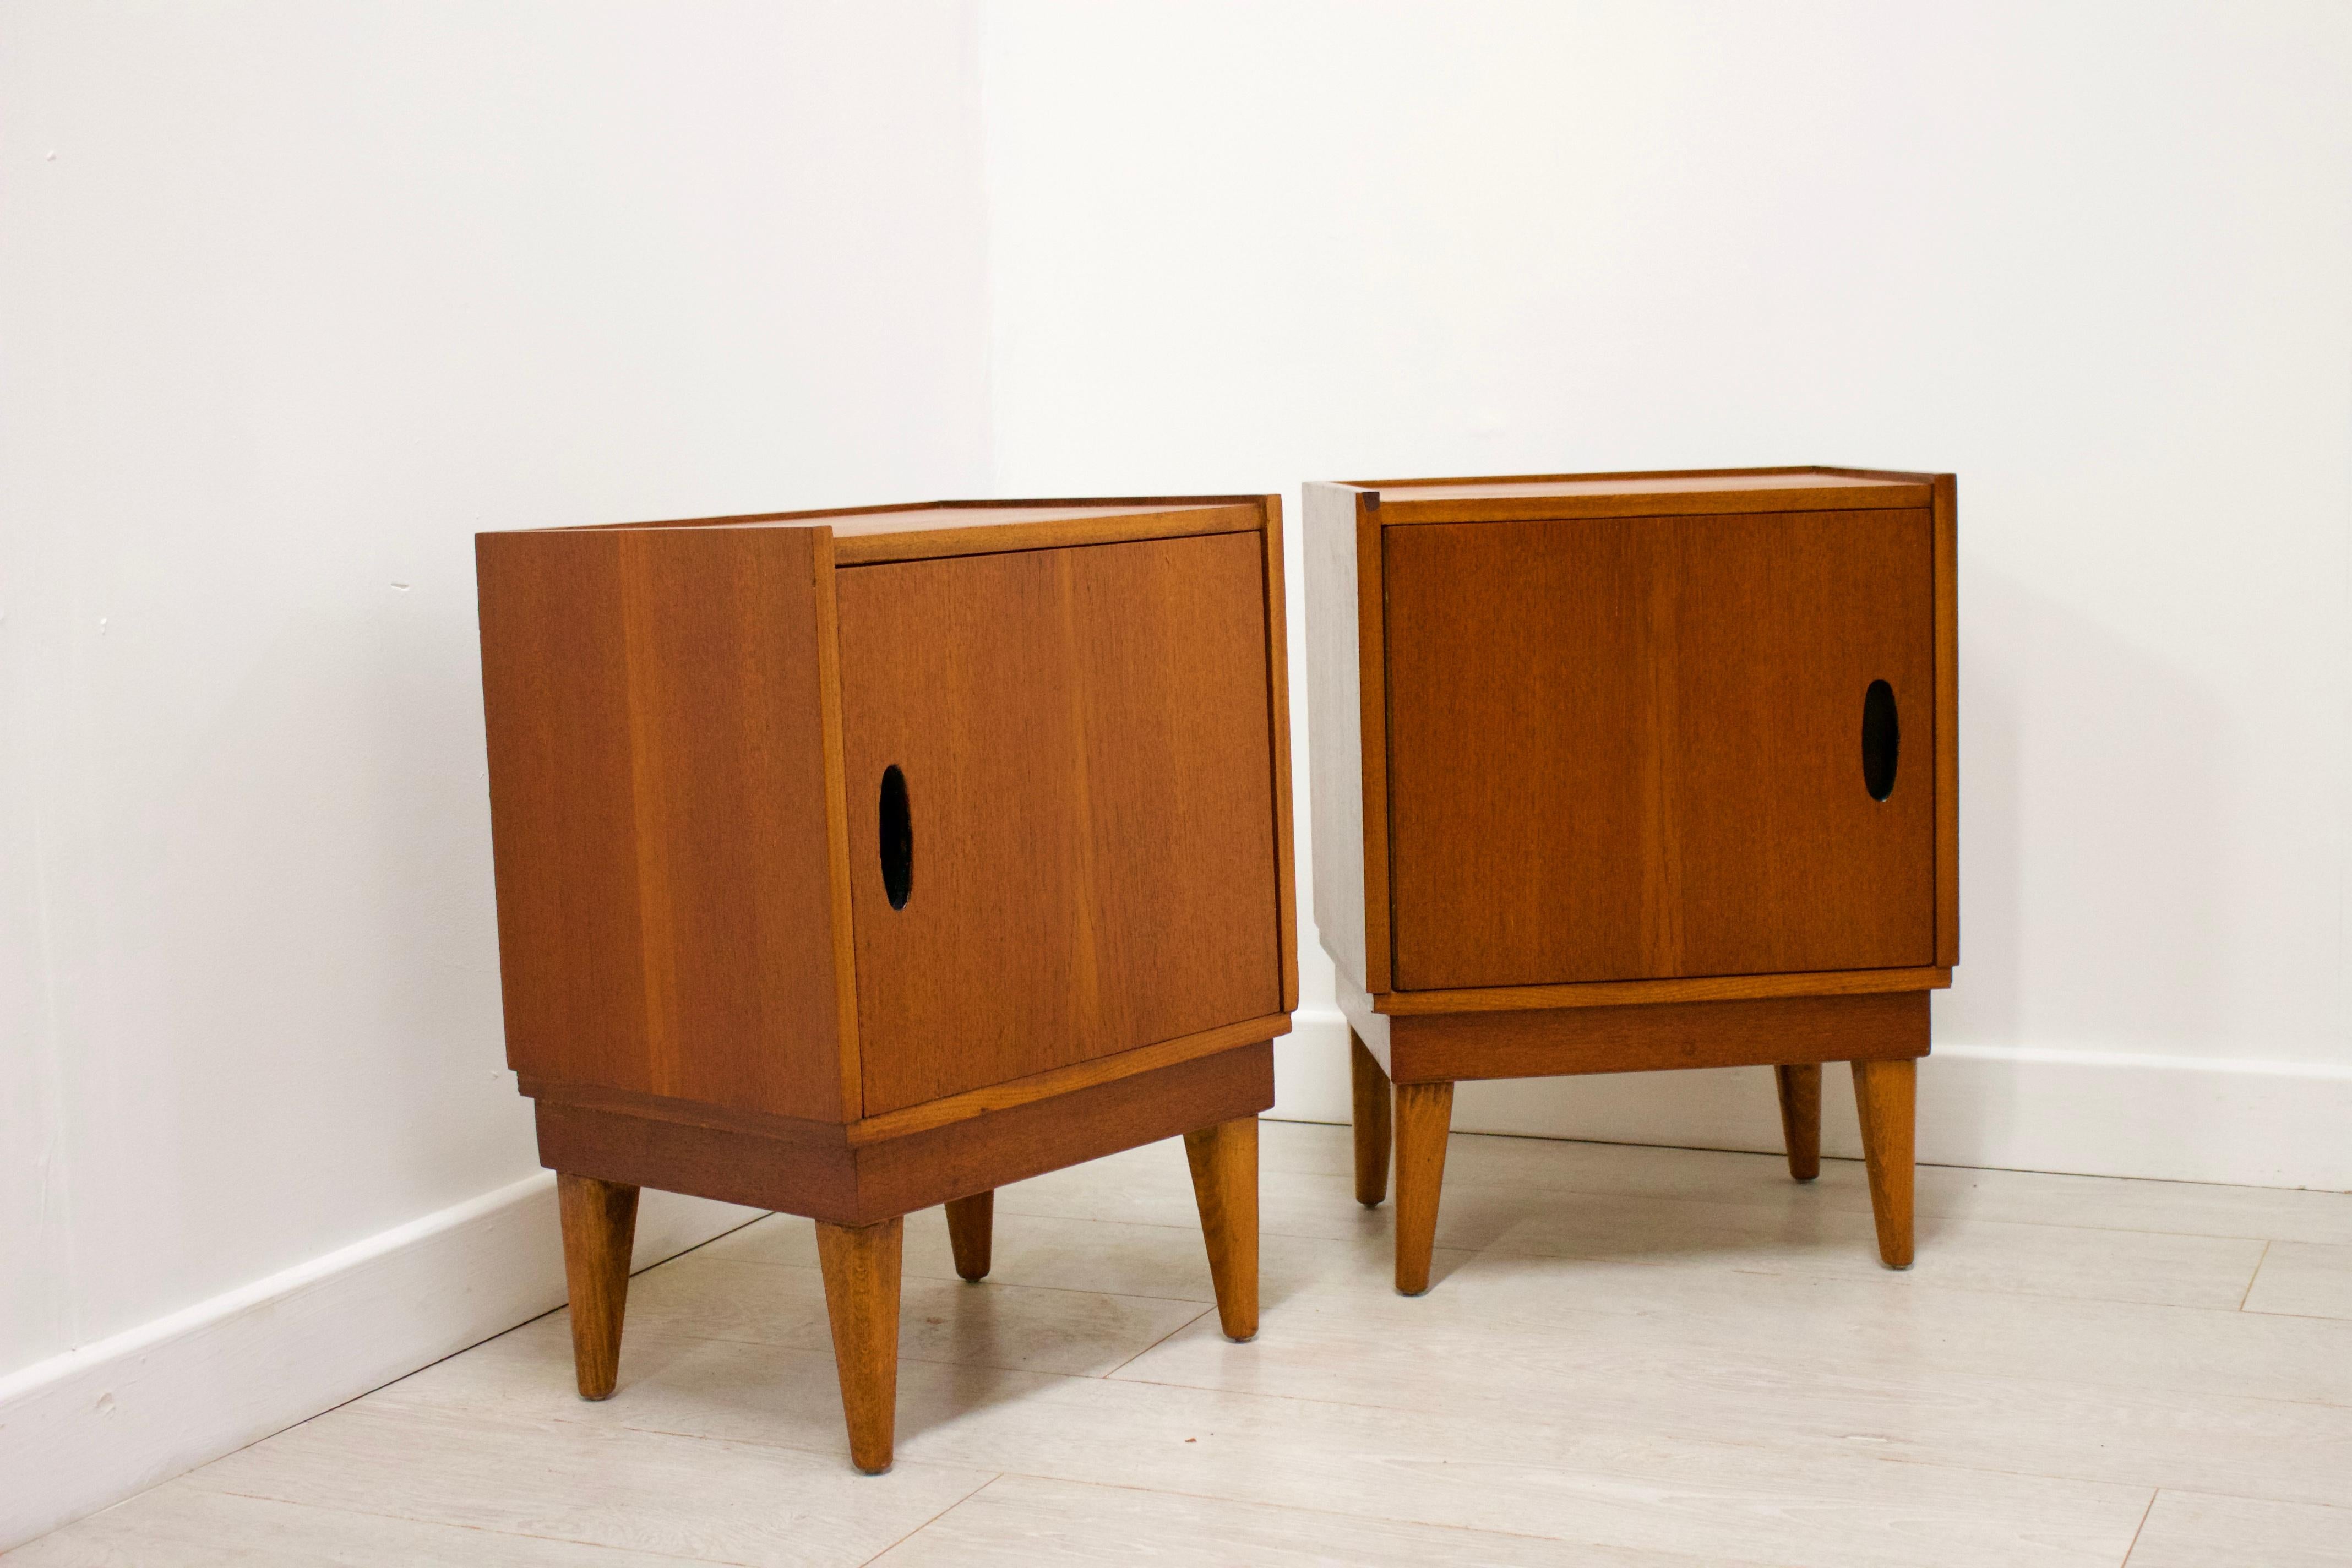 - This is a pair of very stylish midcentury Austinsuite bedside cabinet tables.
- Features a shelf inside both for ample storage.